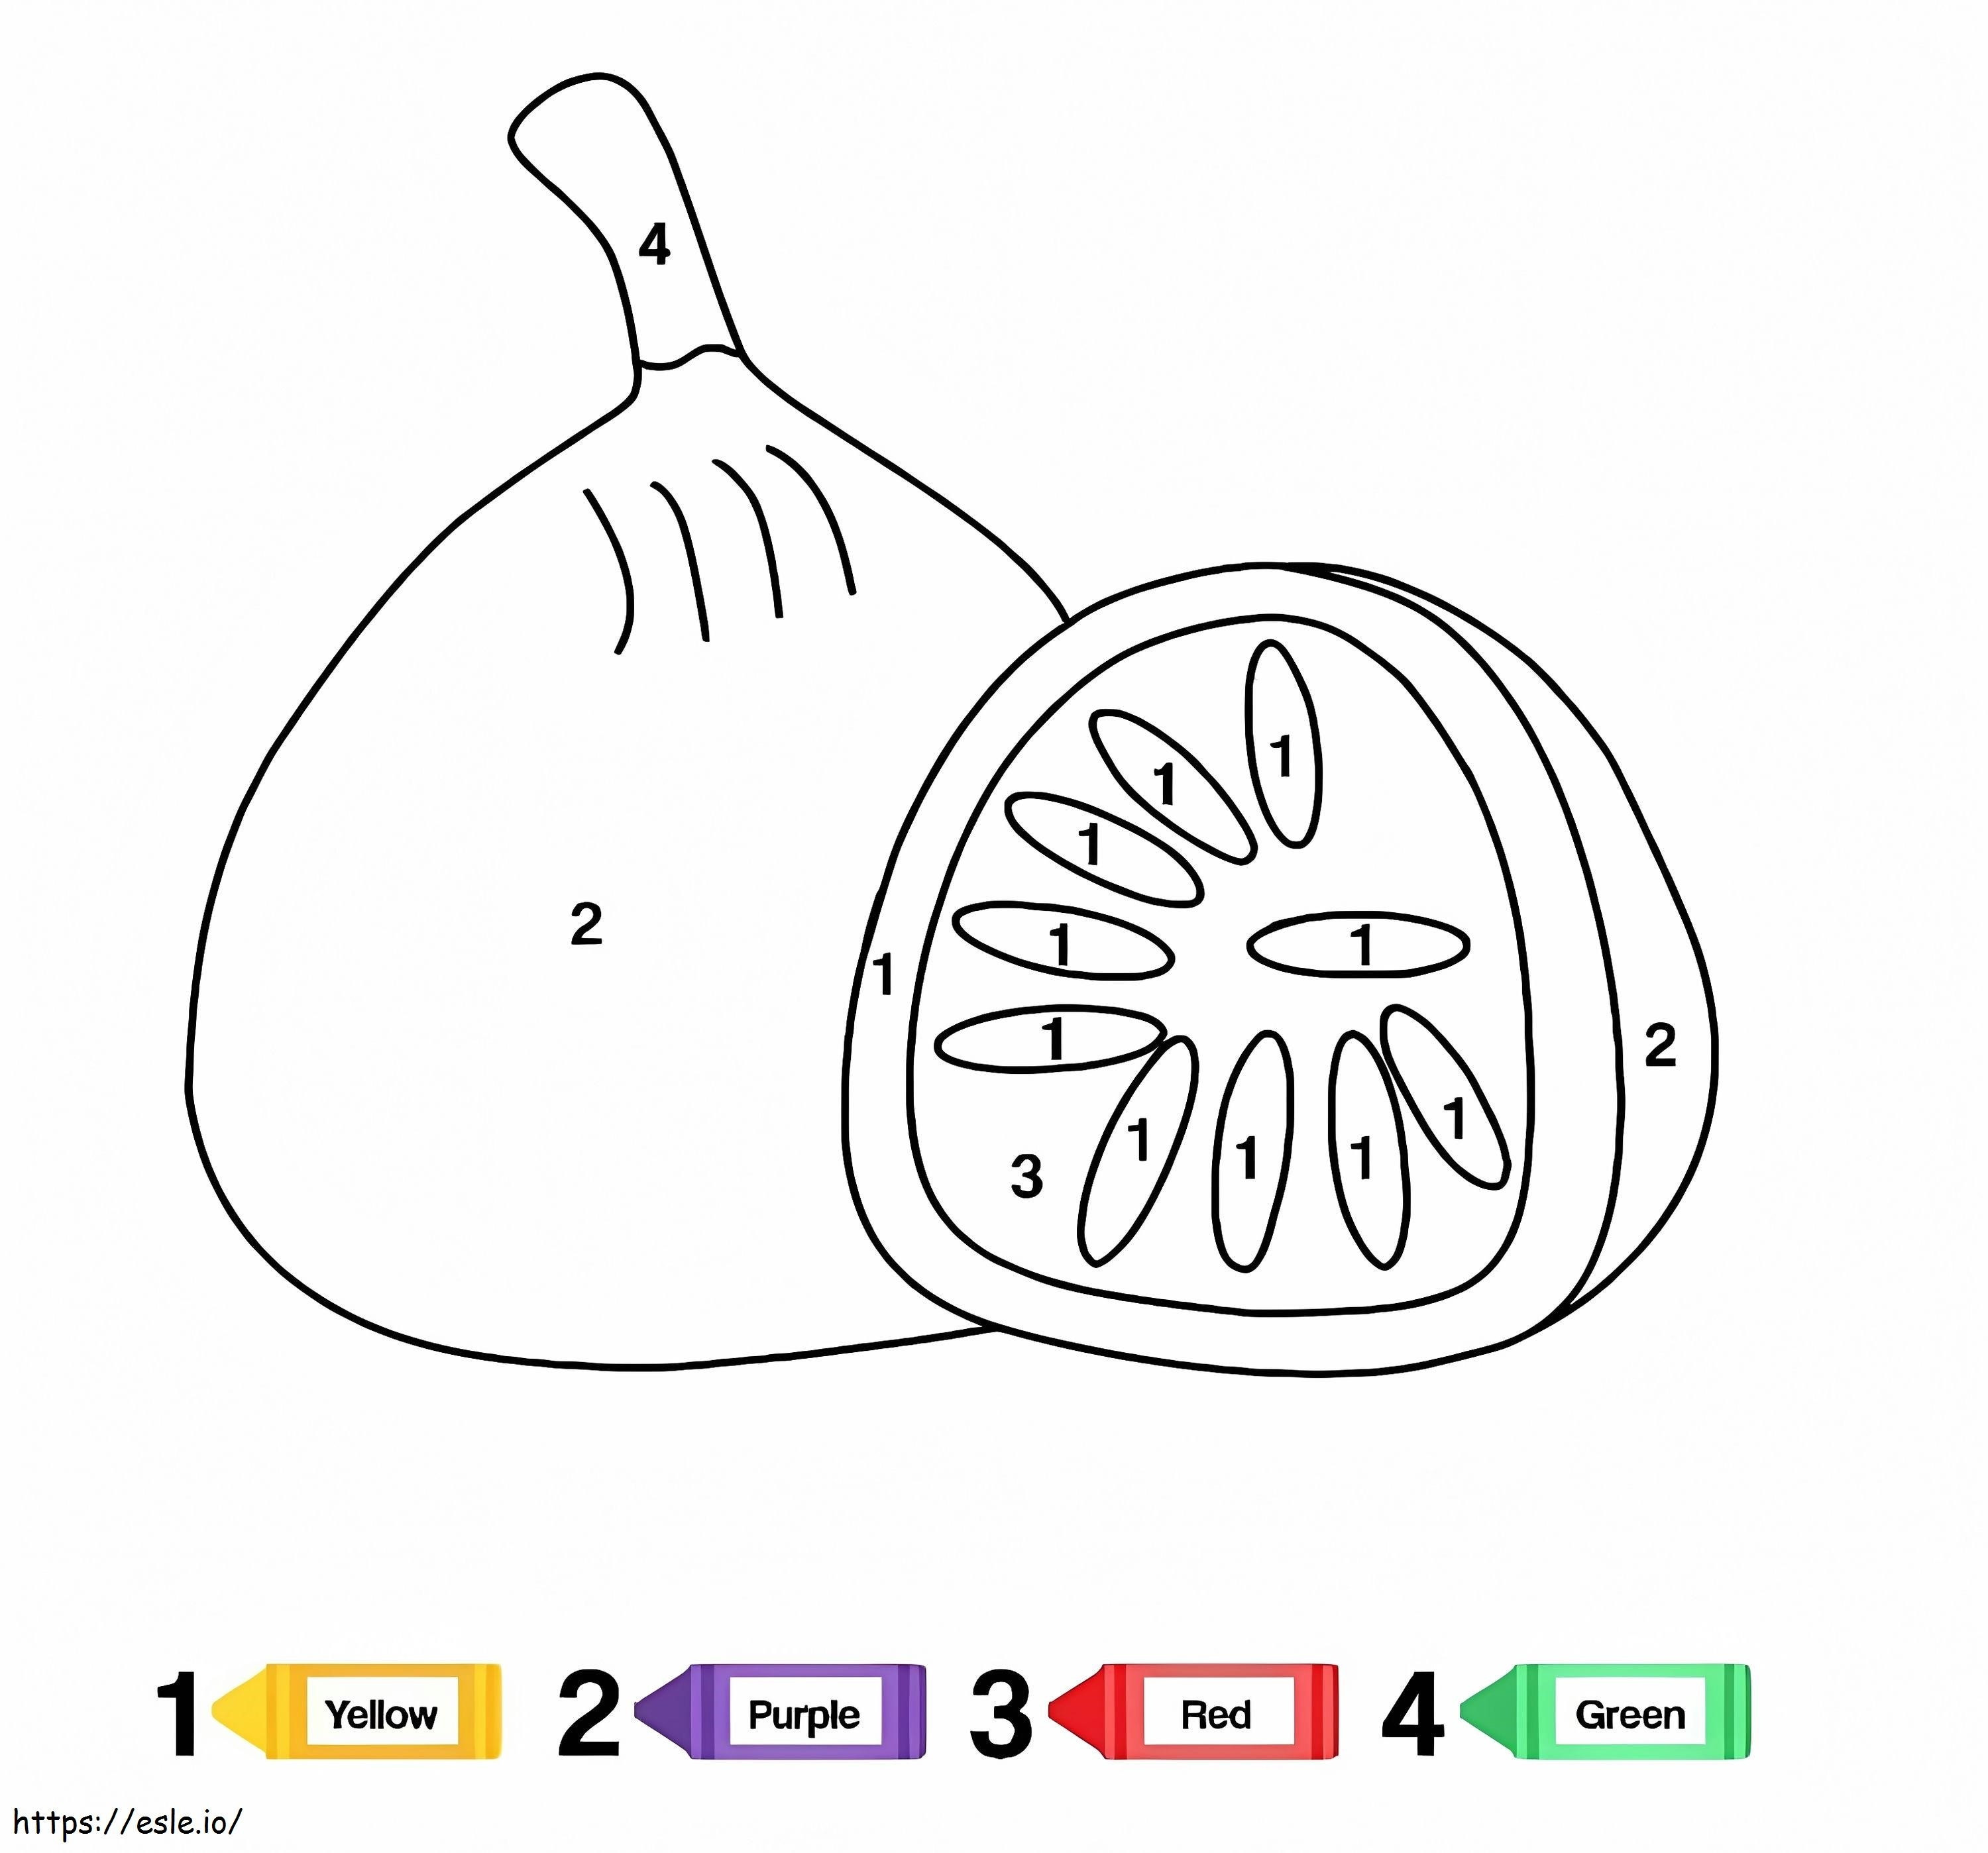 fig-fruit-color-by-number-coloring-page-the-best-porn-website